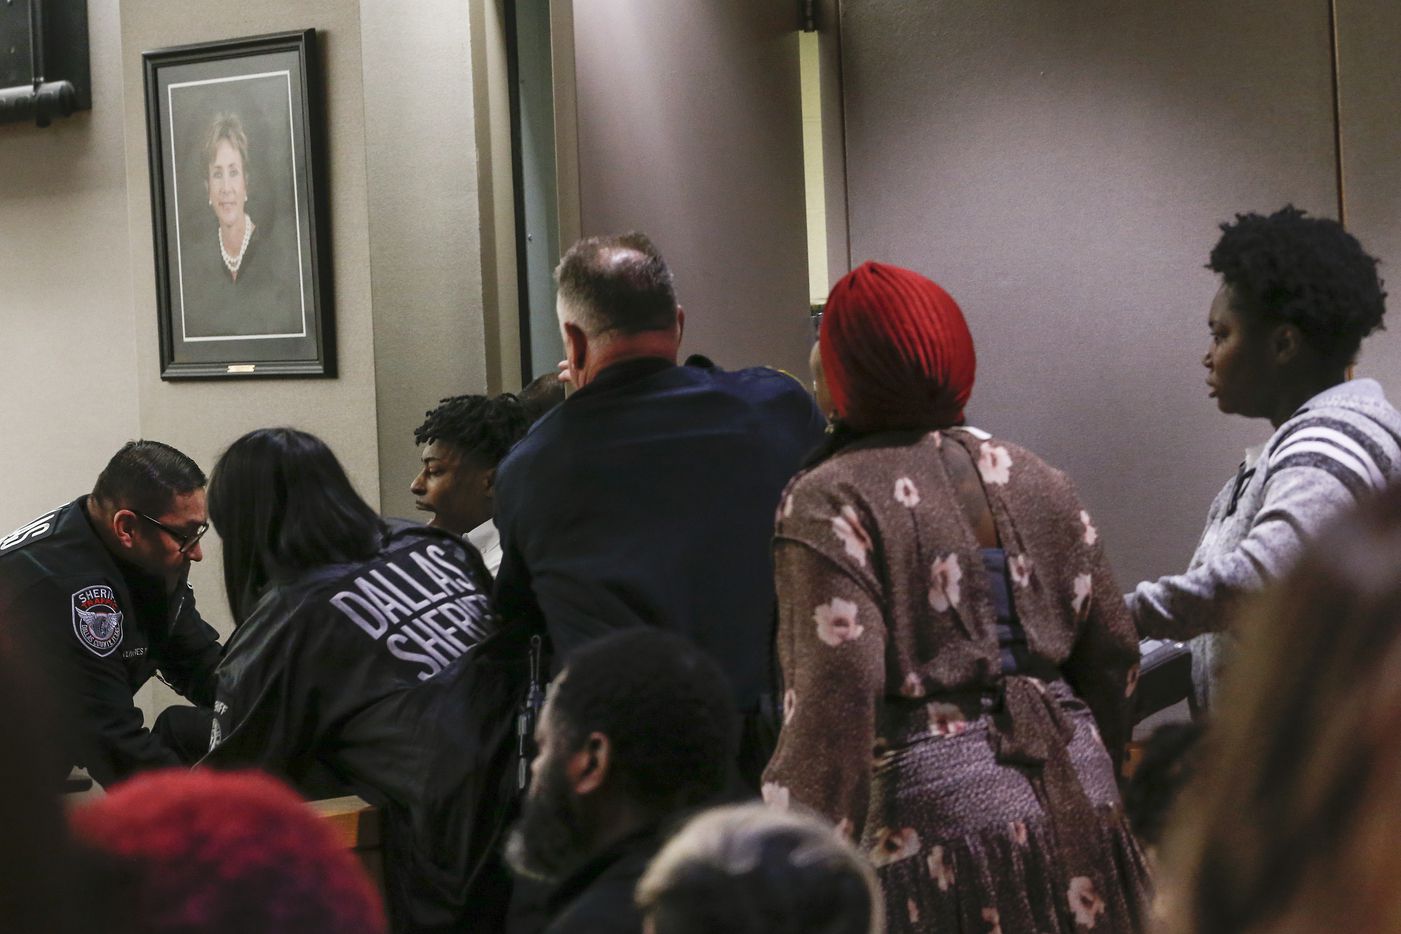 Desmond Jones, one of the men implicated in the kidnapping and death of 13-year-old Shavon Randle, is carried from the courtroom by officers after he had an outburst during the punishment phase of his trial. Jones was found guilty of engaging in organized criminal activity. (Ryan Michalesko/The Dallas Morning News)